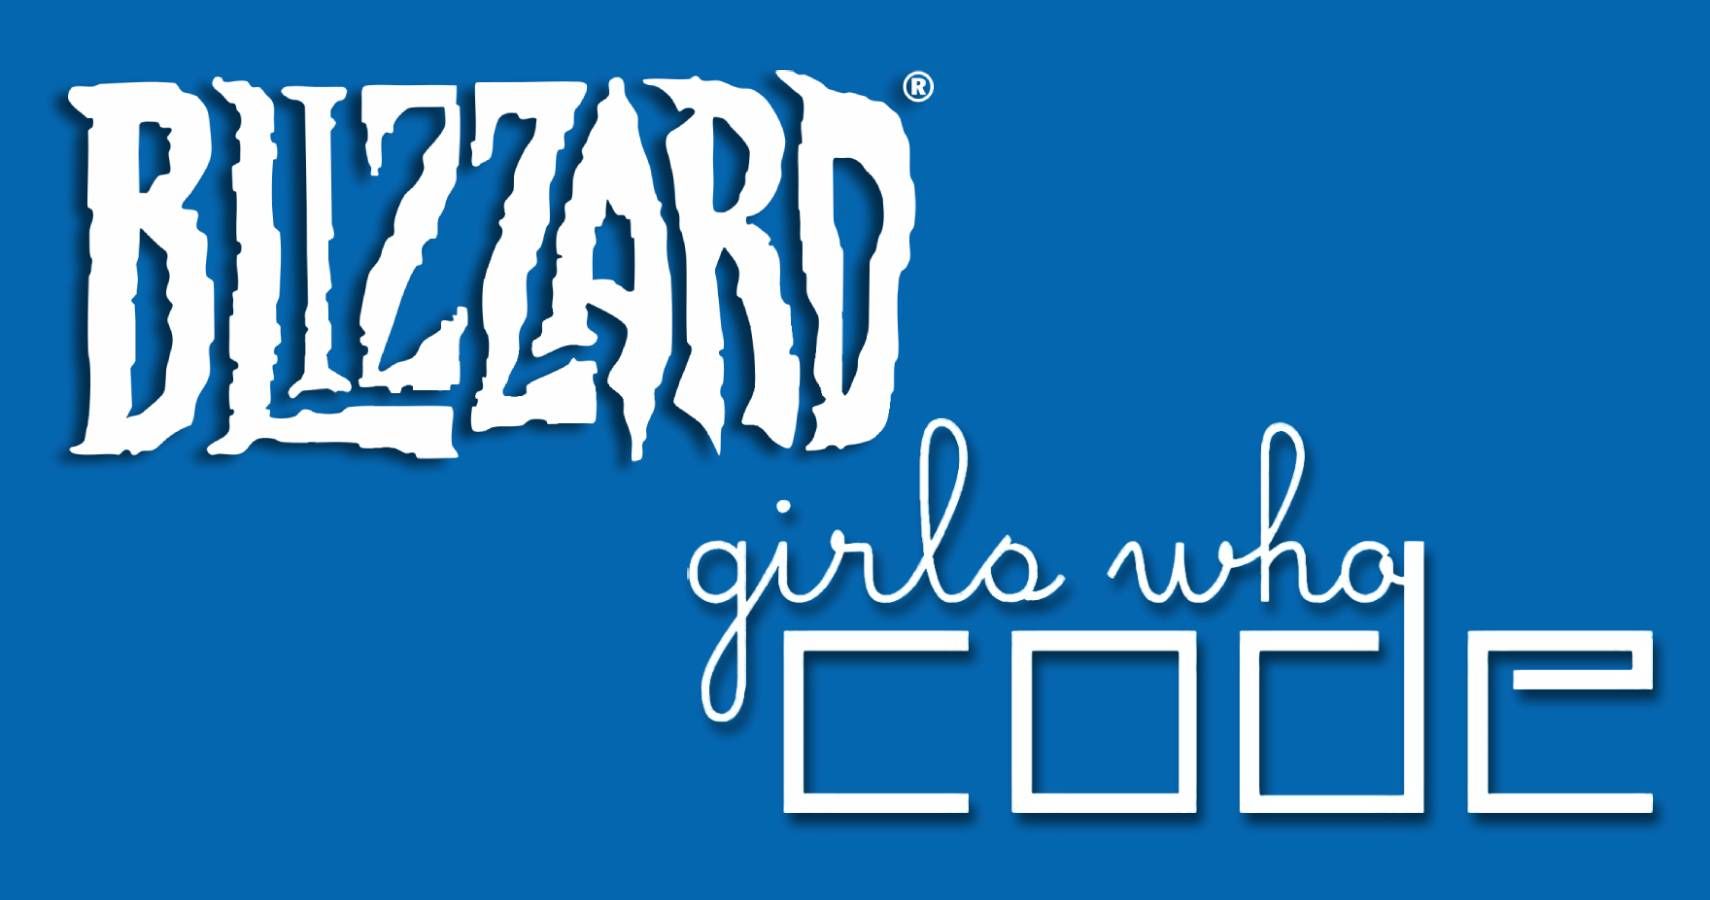 Blizzard Teams Up With Girls Who Code To Educate Next Generation Of Programmers